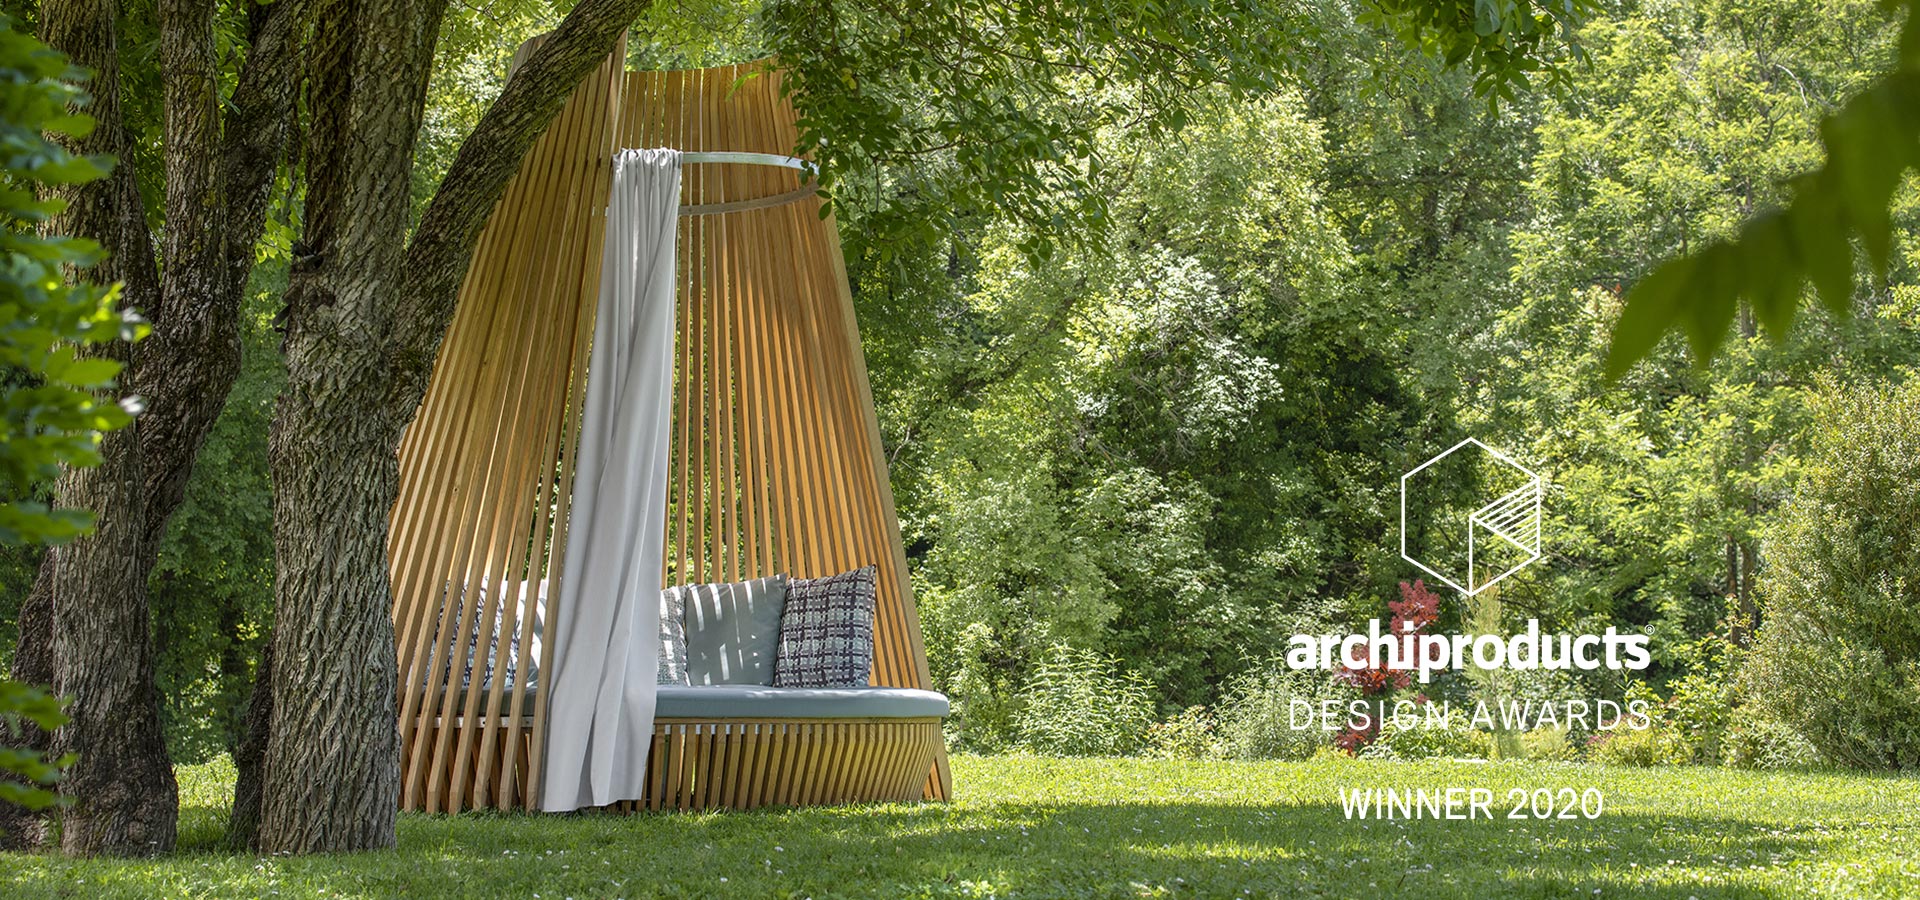 Hut Wins Then Archiproducts Design Award 2020 Ethimo News 9470